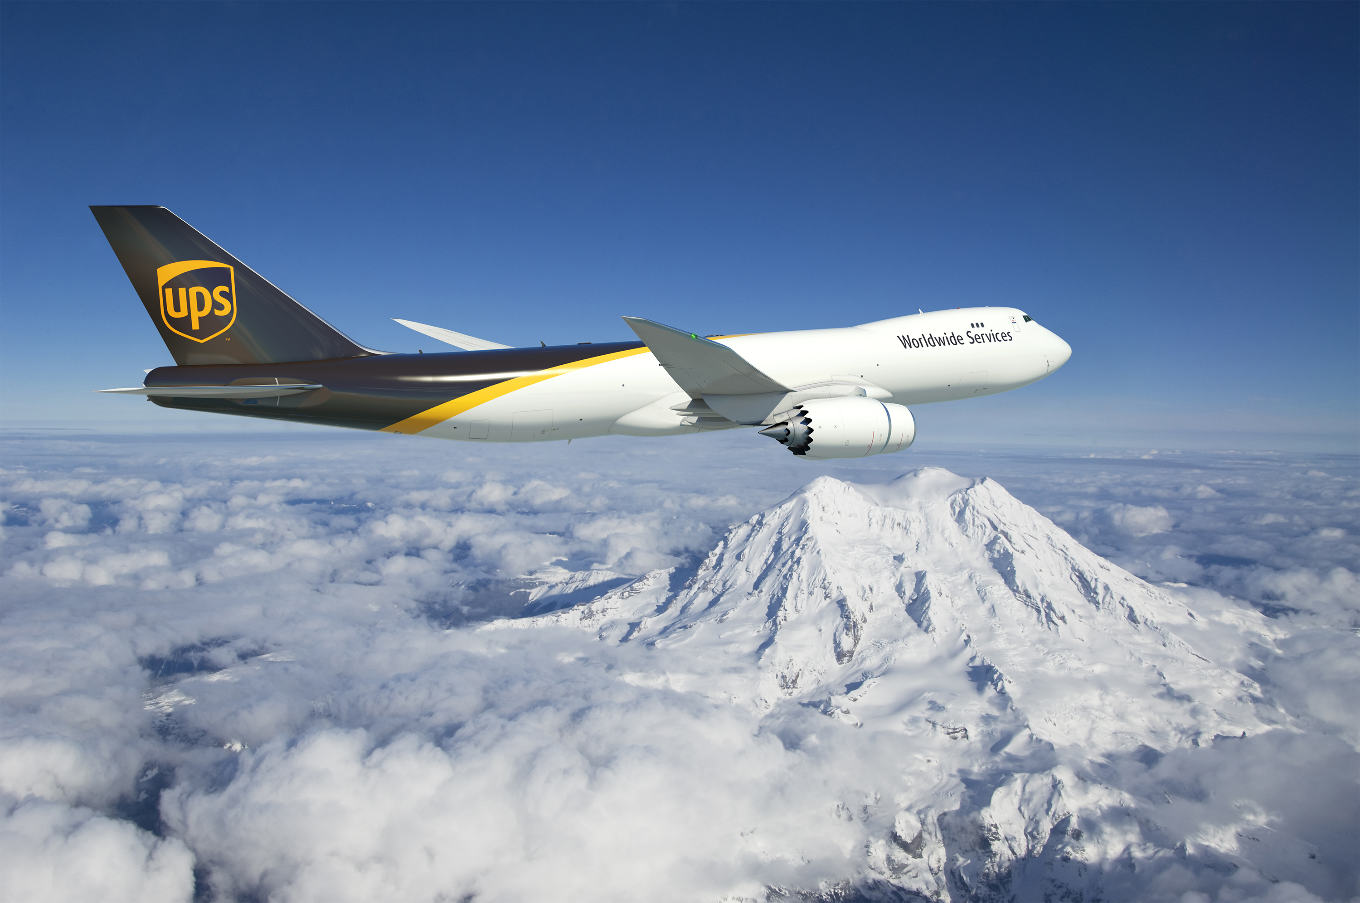 Boeing gets 747 boost from UPS